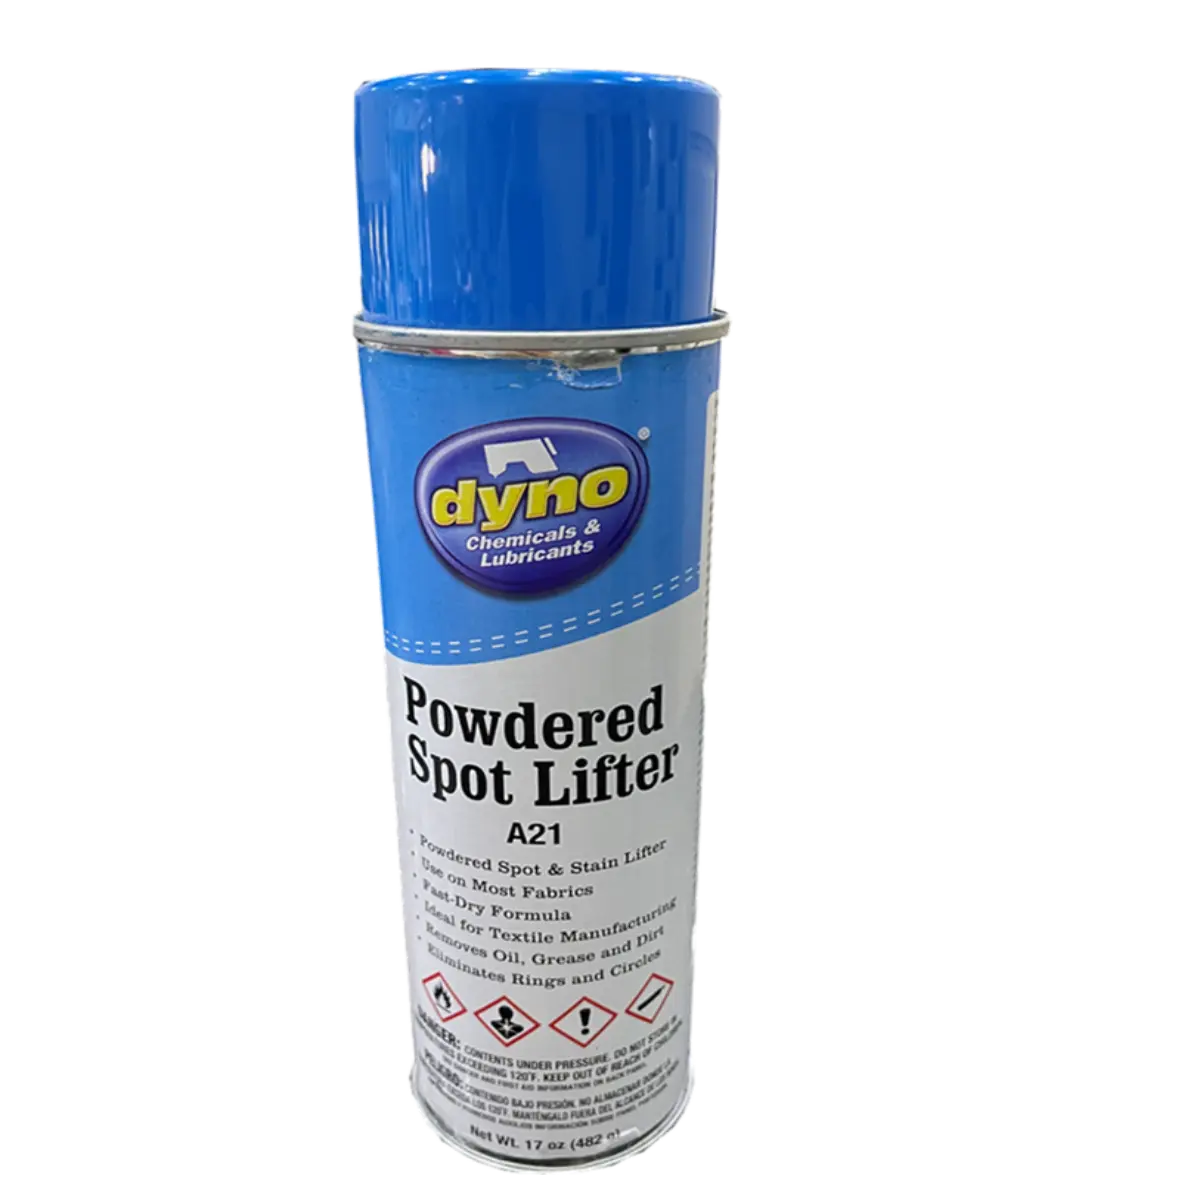 Powdered Spot And Stain Lifter - Suitable For Most Fabrics A21 by Dyno